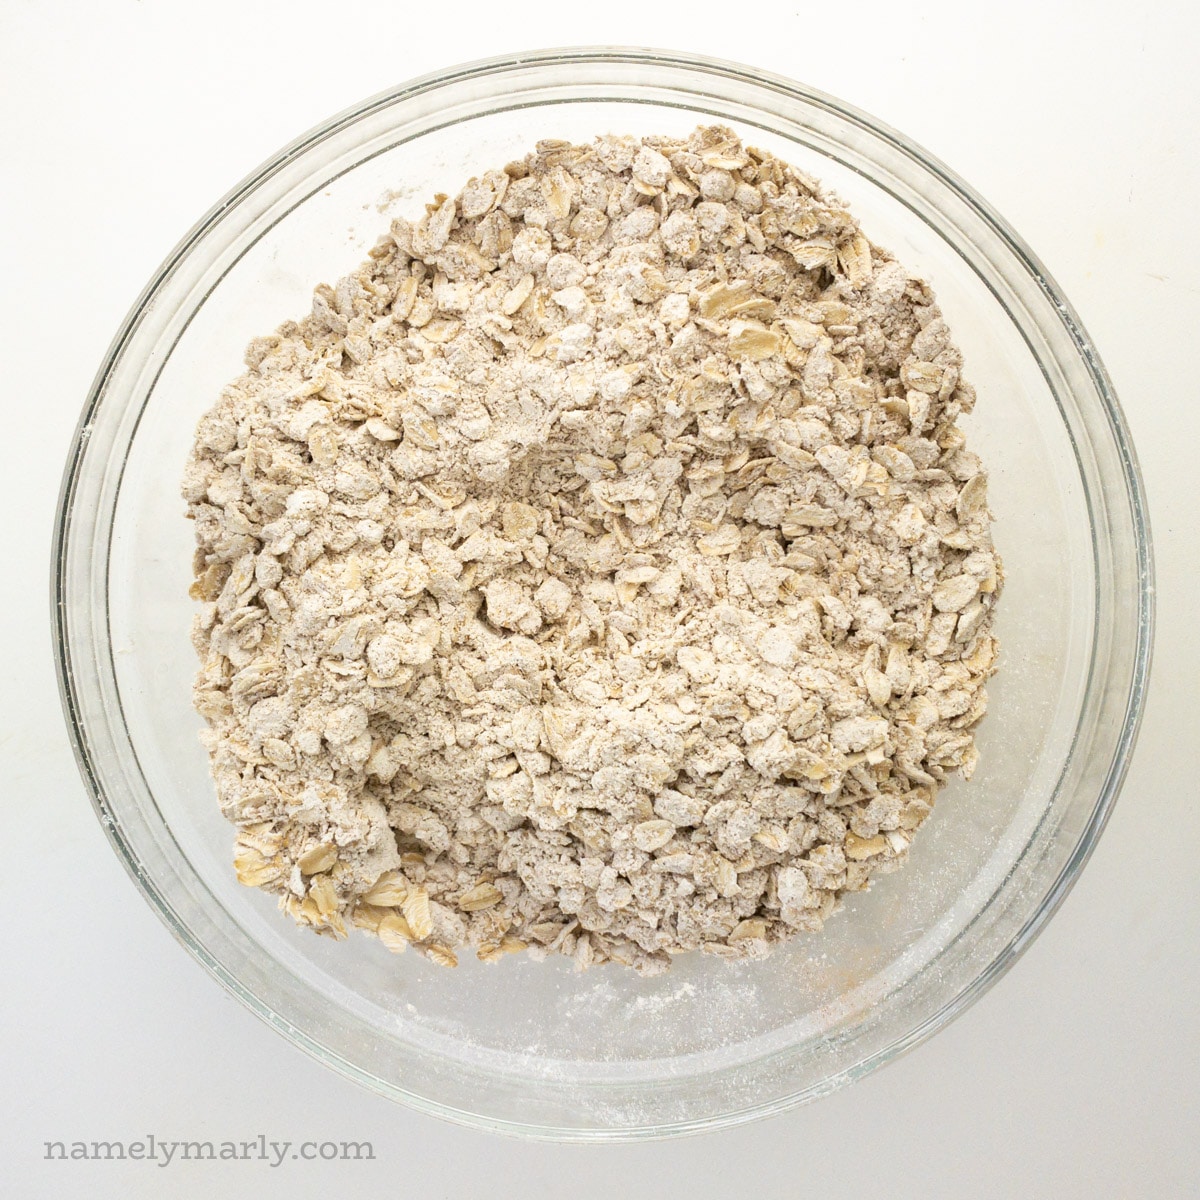 A glass bowl holds flour and oatmeal mixture for cookies.